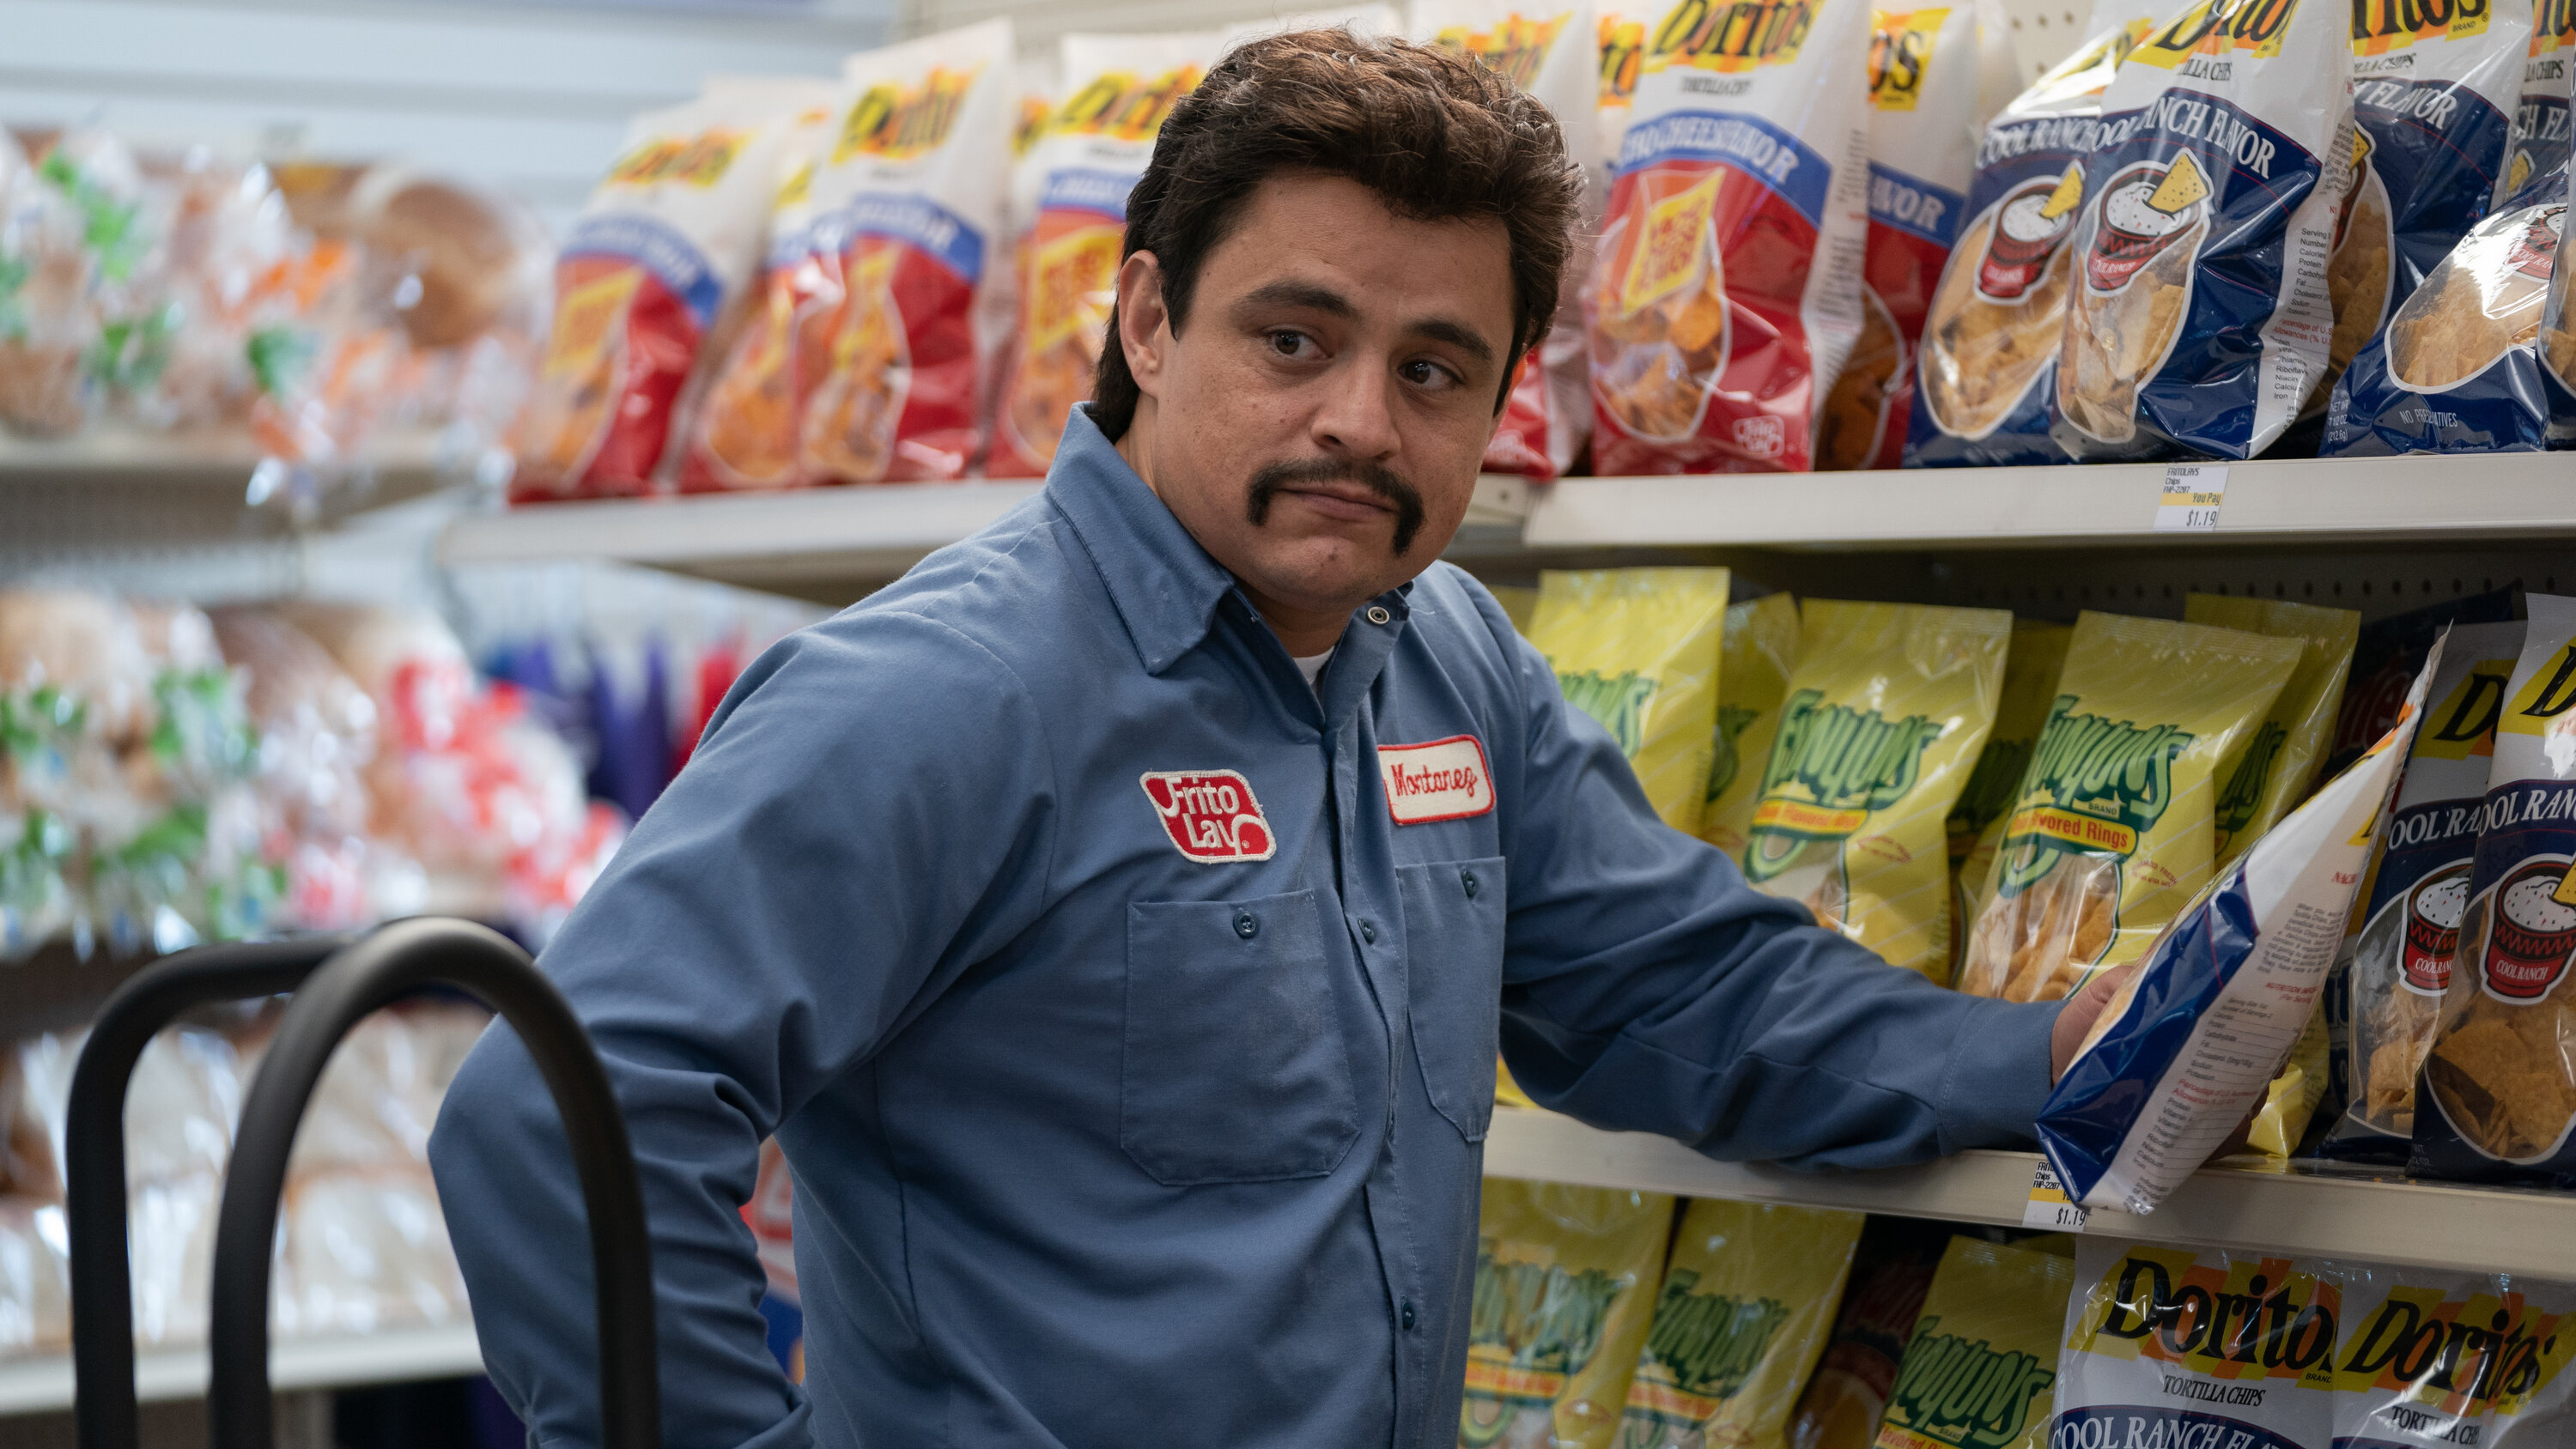 A still from the movie Flamin Hot in which the lead character, Richard Montañez, is standing in an aisle of a shop next to crisps.